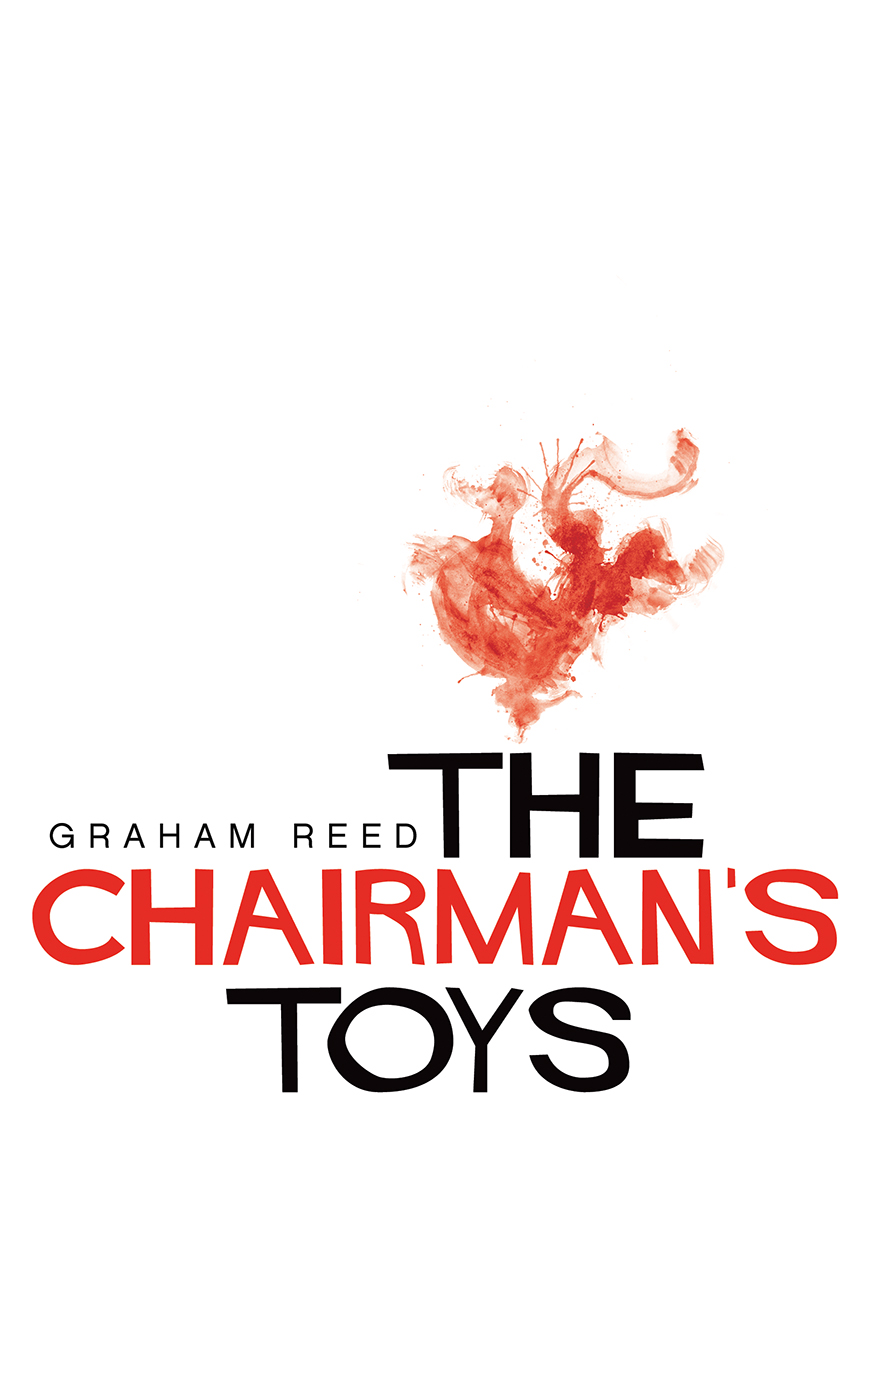 The Chairman's Toys by Graham Reed